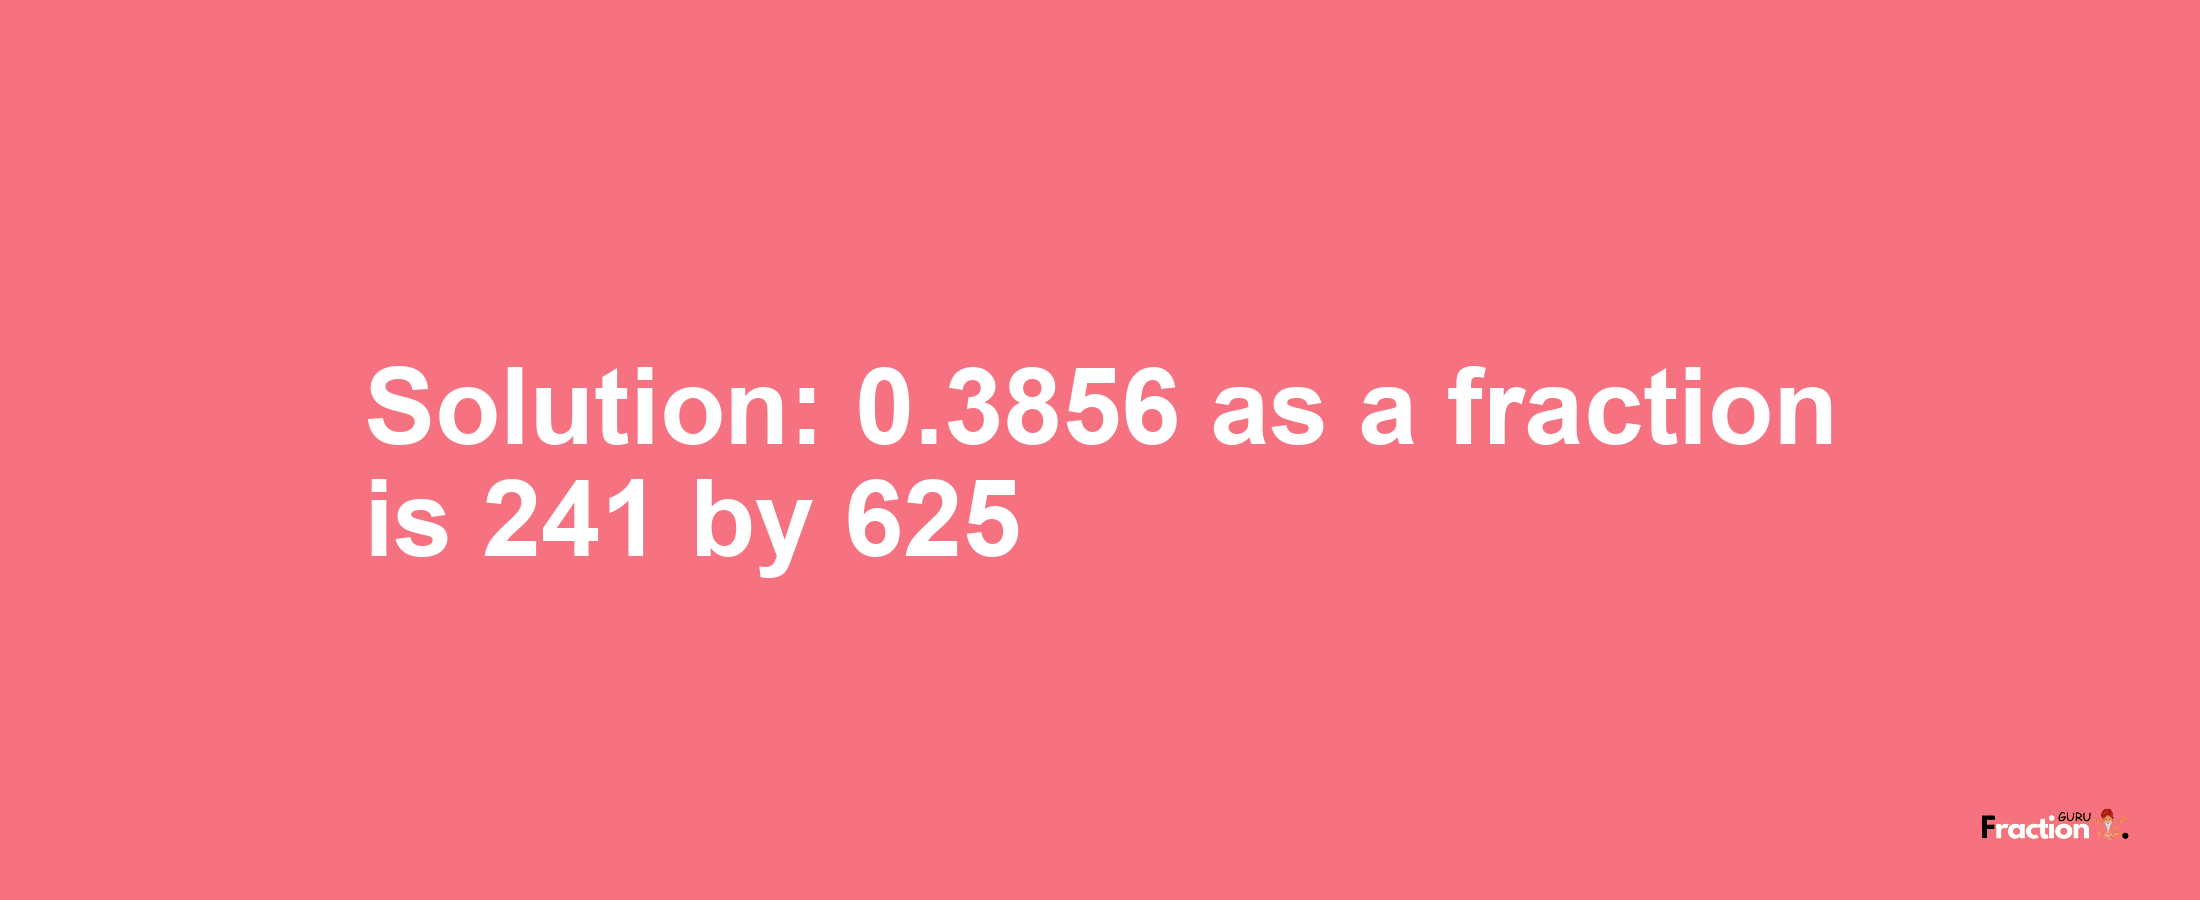 Solution:0.3856 as a fraction is 241/625